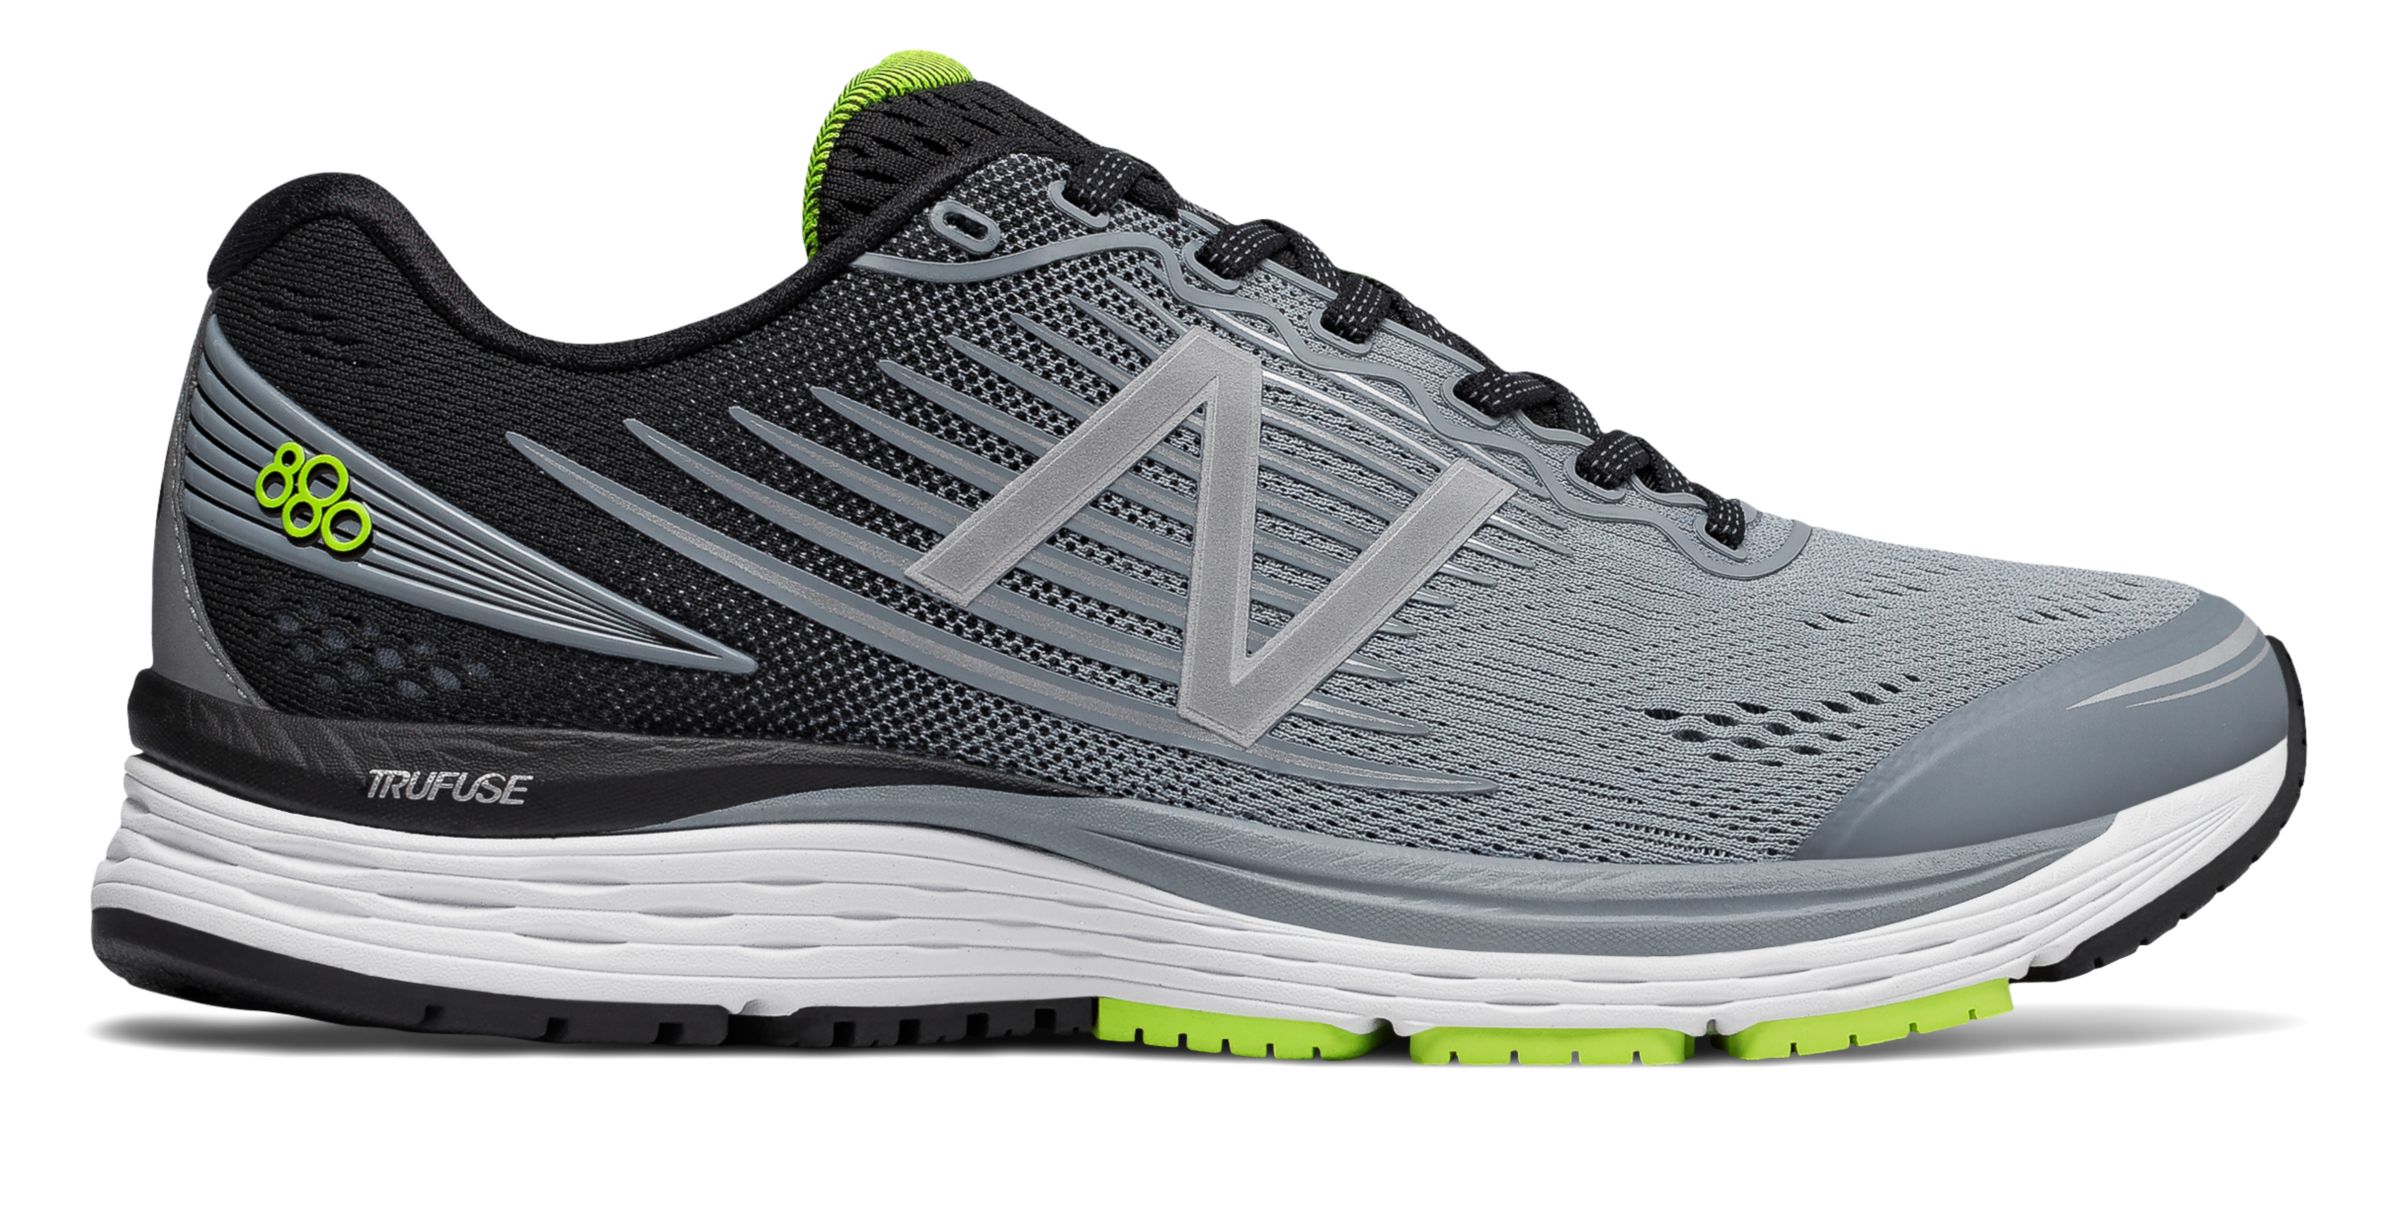 New Balance M880-V8 on Sale - Discounts Up to 68% Off on M880GY8 at Joe's New  Balance Outlet